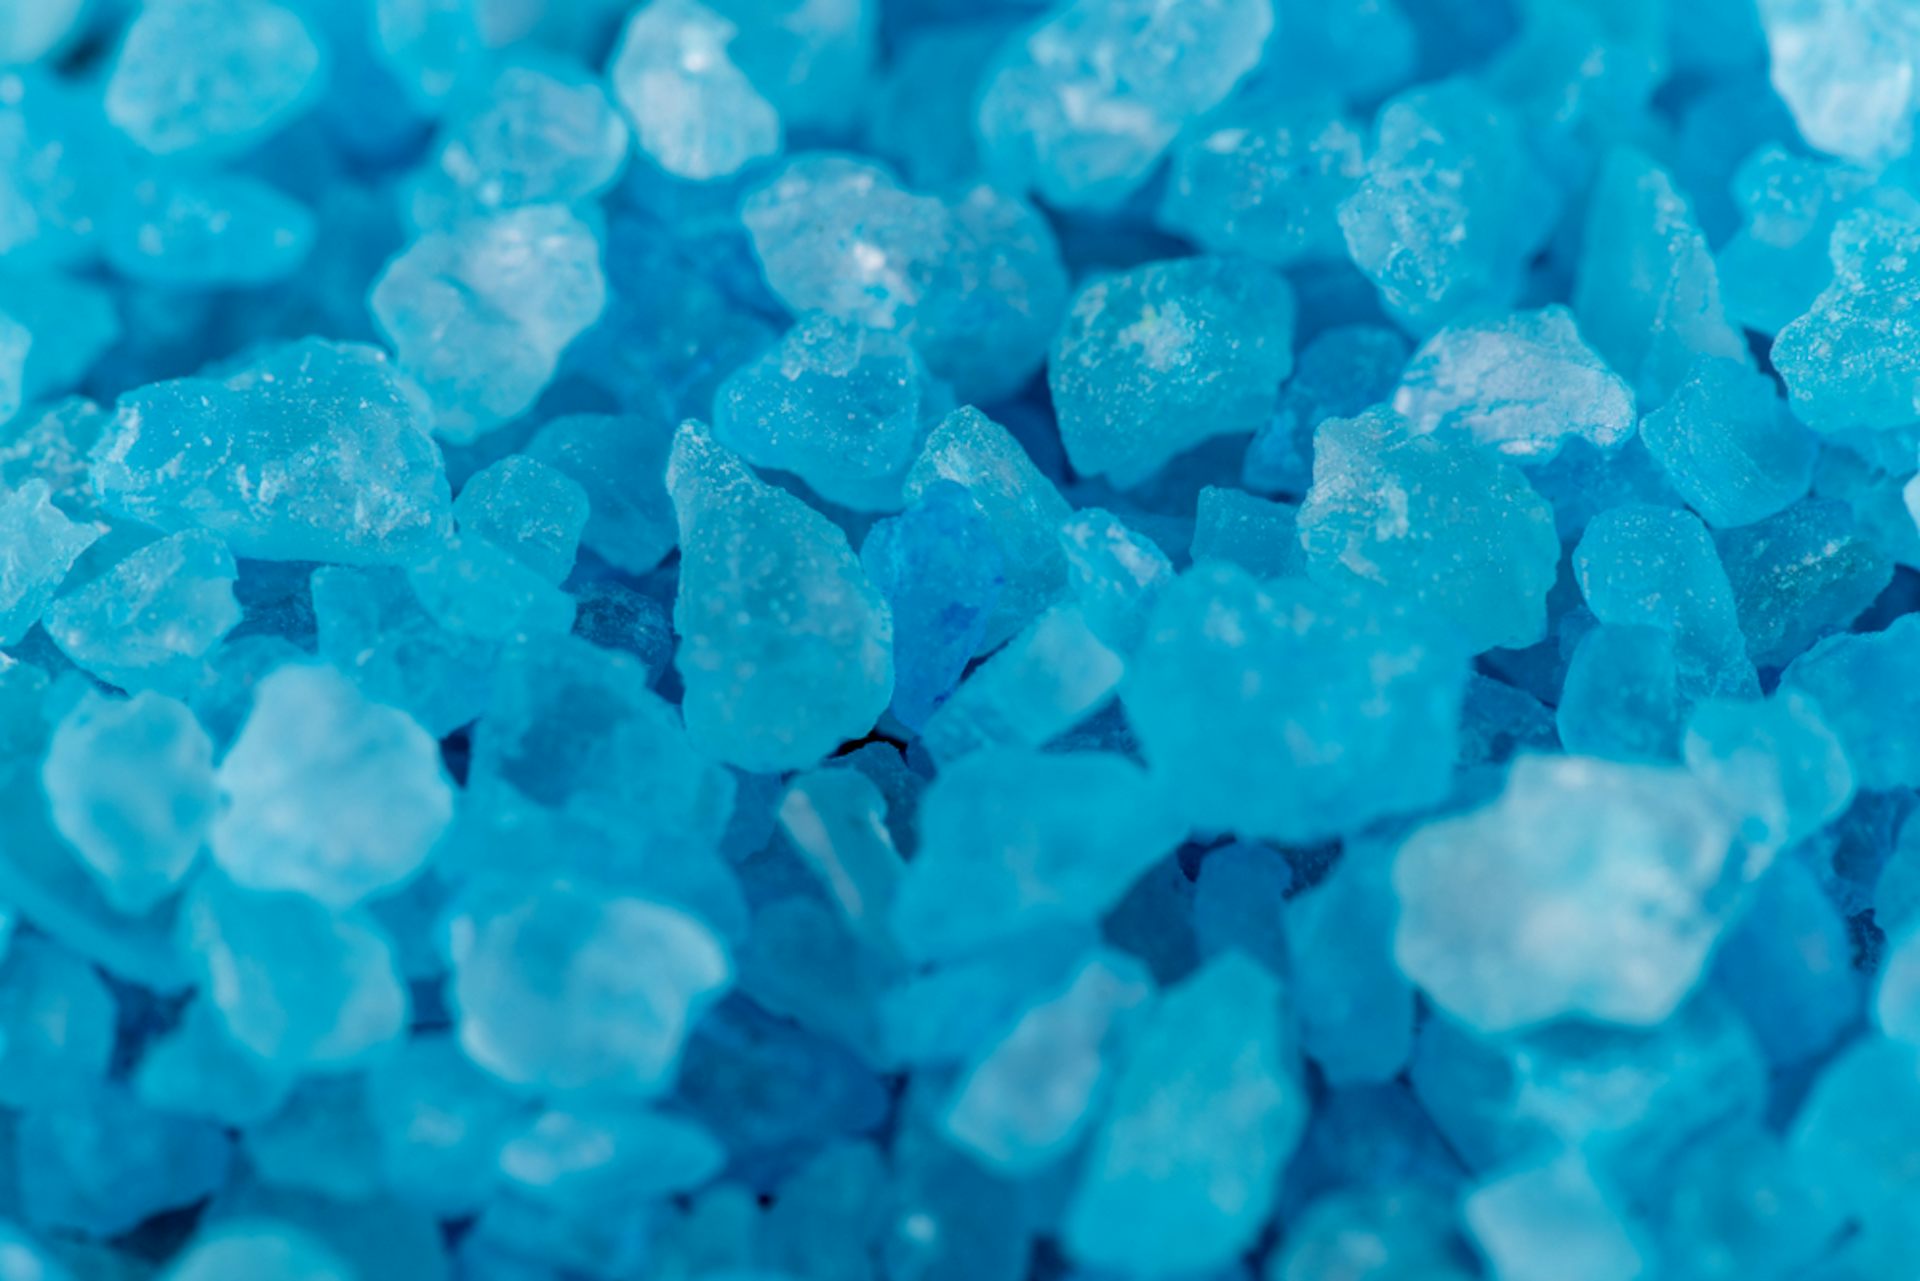 Crystal Meth: Europe Could Now See a Surge in Supply and Use